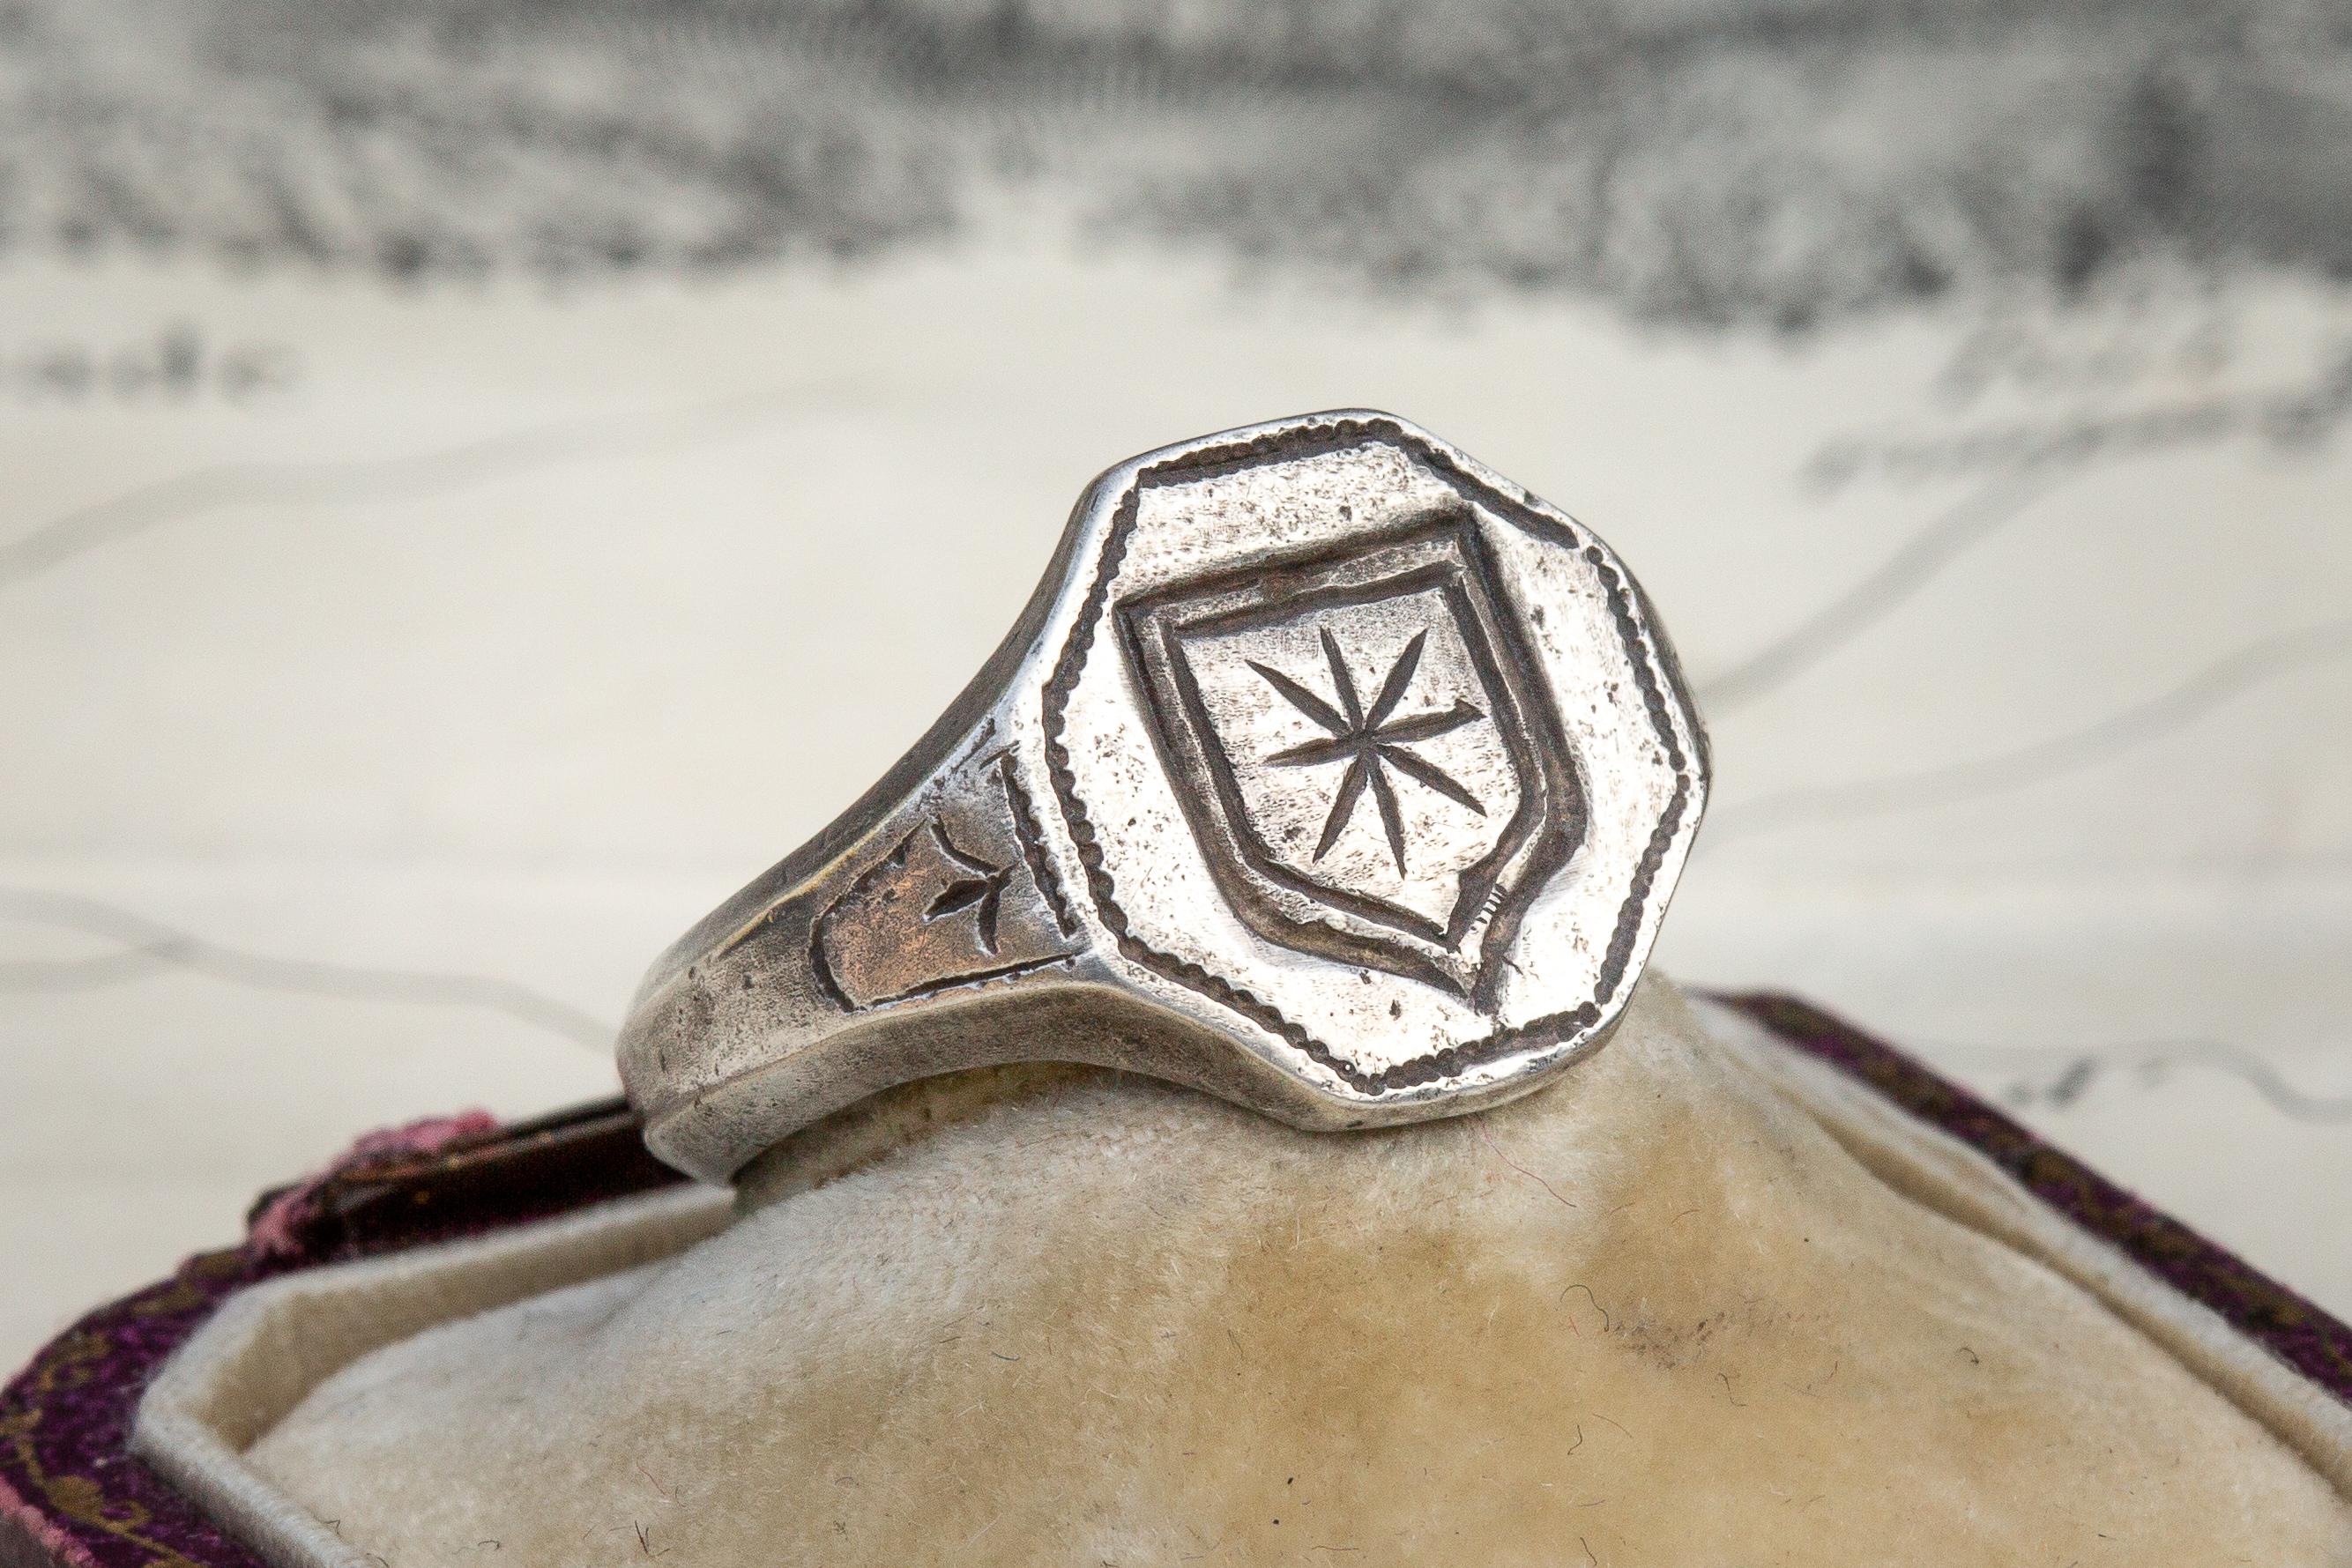 This rare heraldic silver intaglio signet ring dates from the late 17th century and originates from Western Europe. The flat, octagonal bezel is engraved with a noble family coat of arms depicting an eight pointed star. The silver ring is cast in